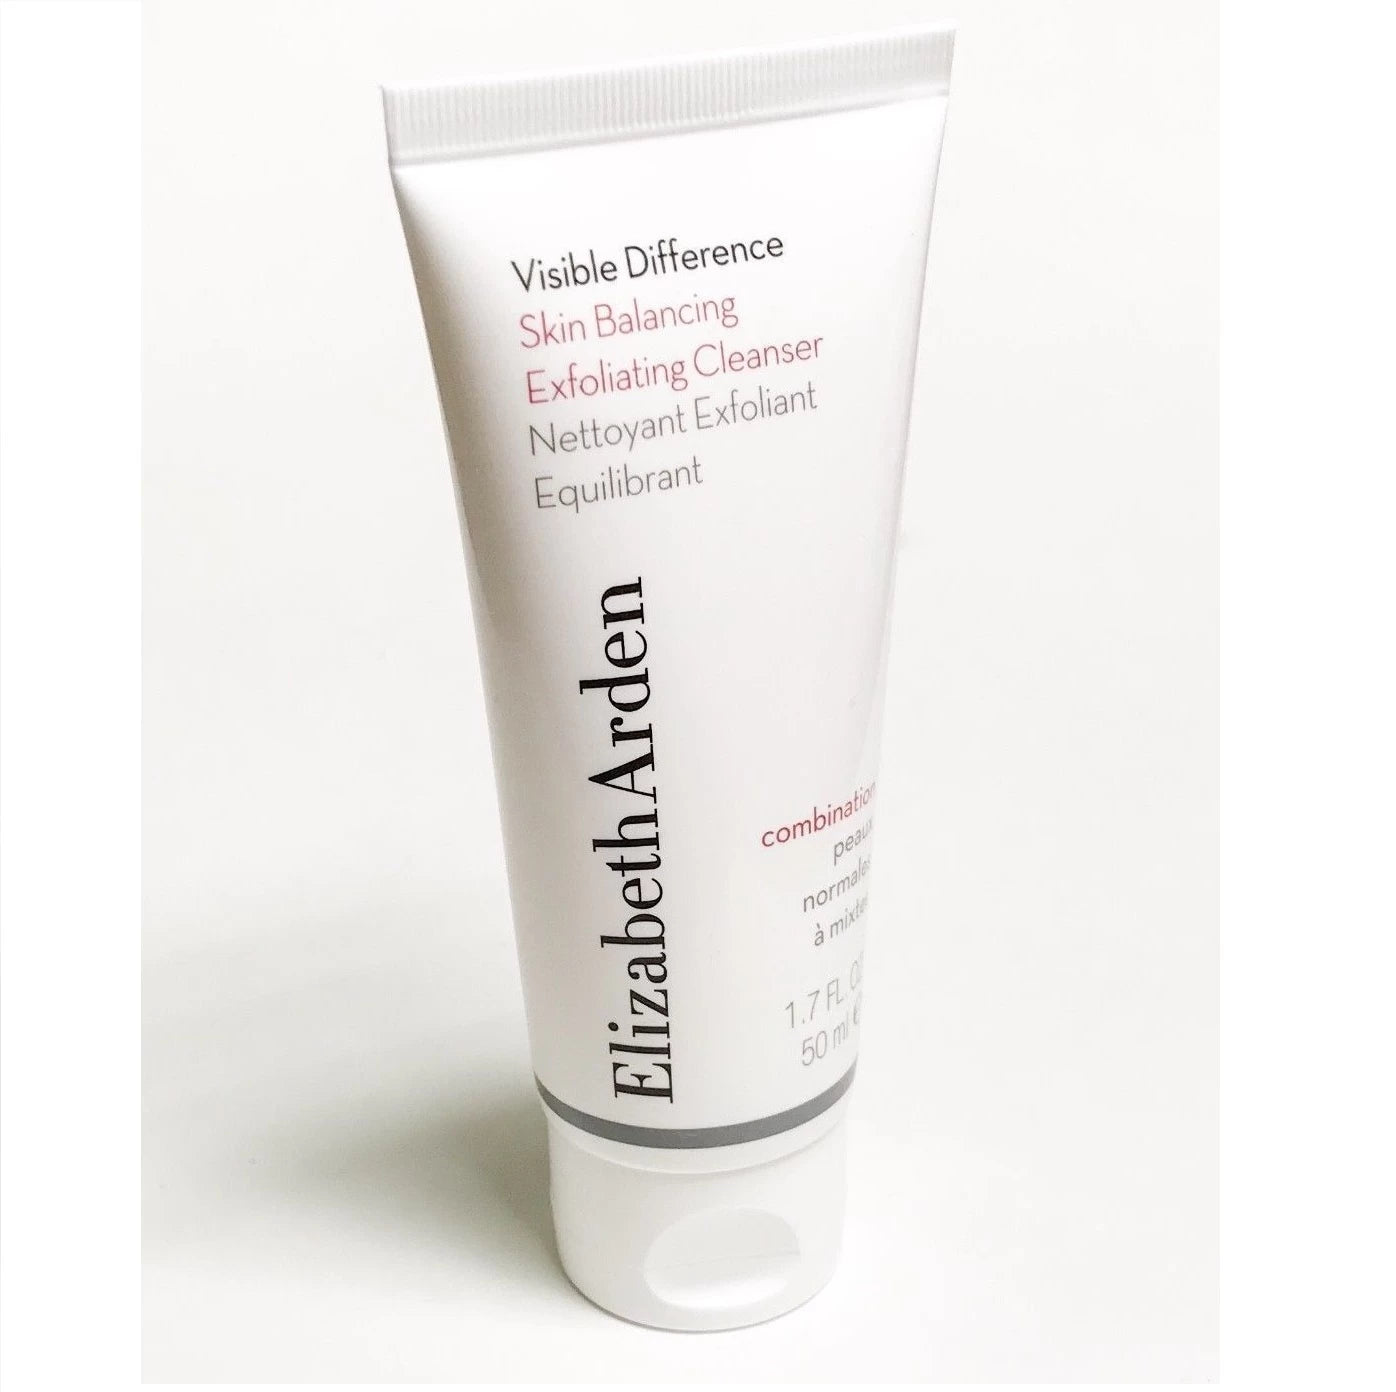 Elizabeth Arden Visible Difference Skin Balancing Exfoliating Cleanser 50ml-BeautyNmakeup.co.uk